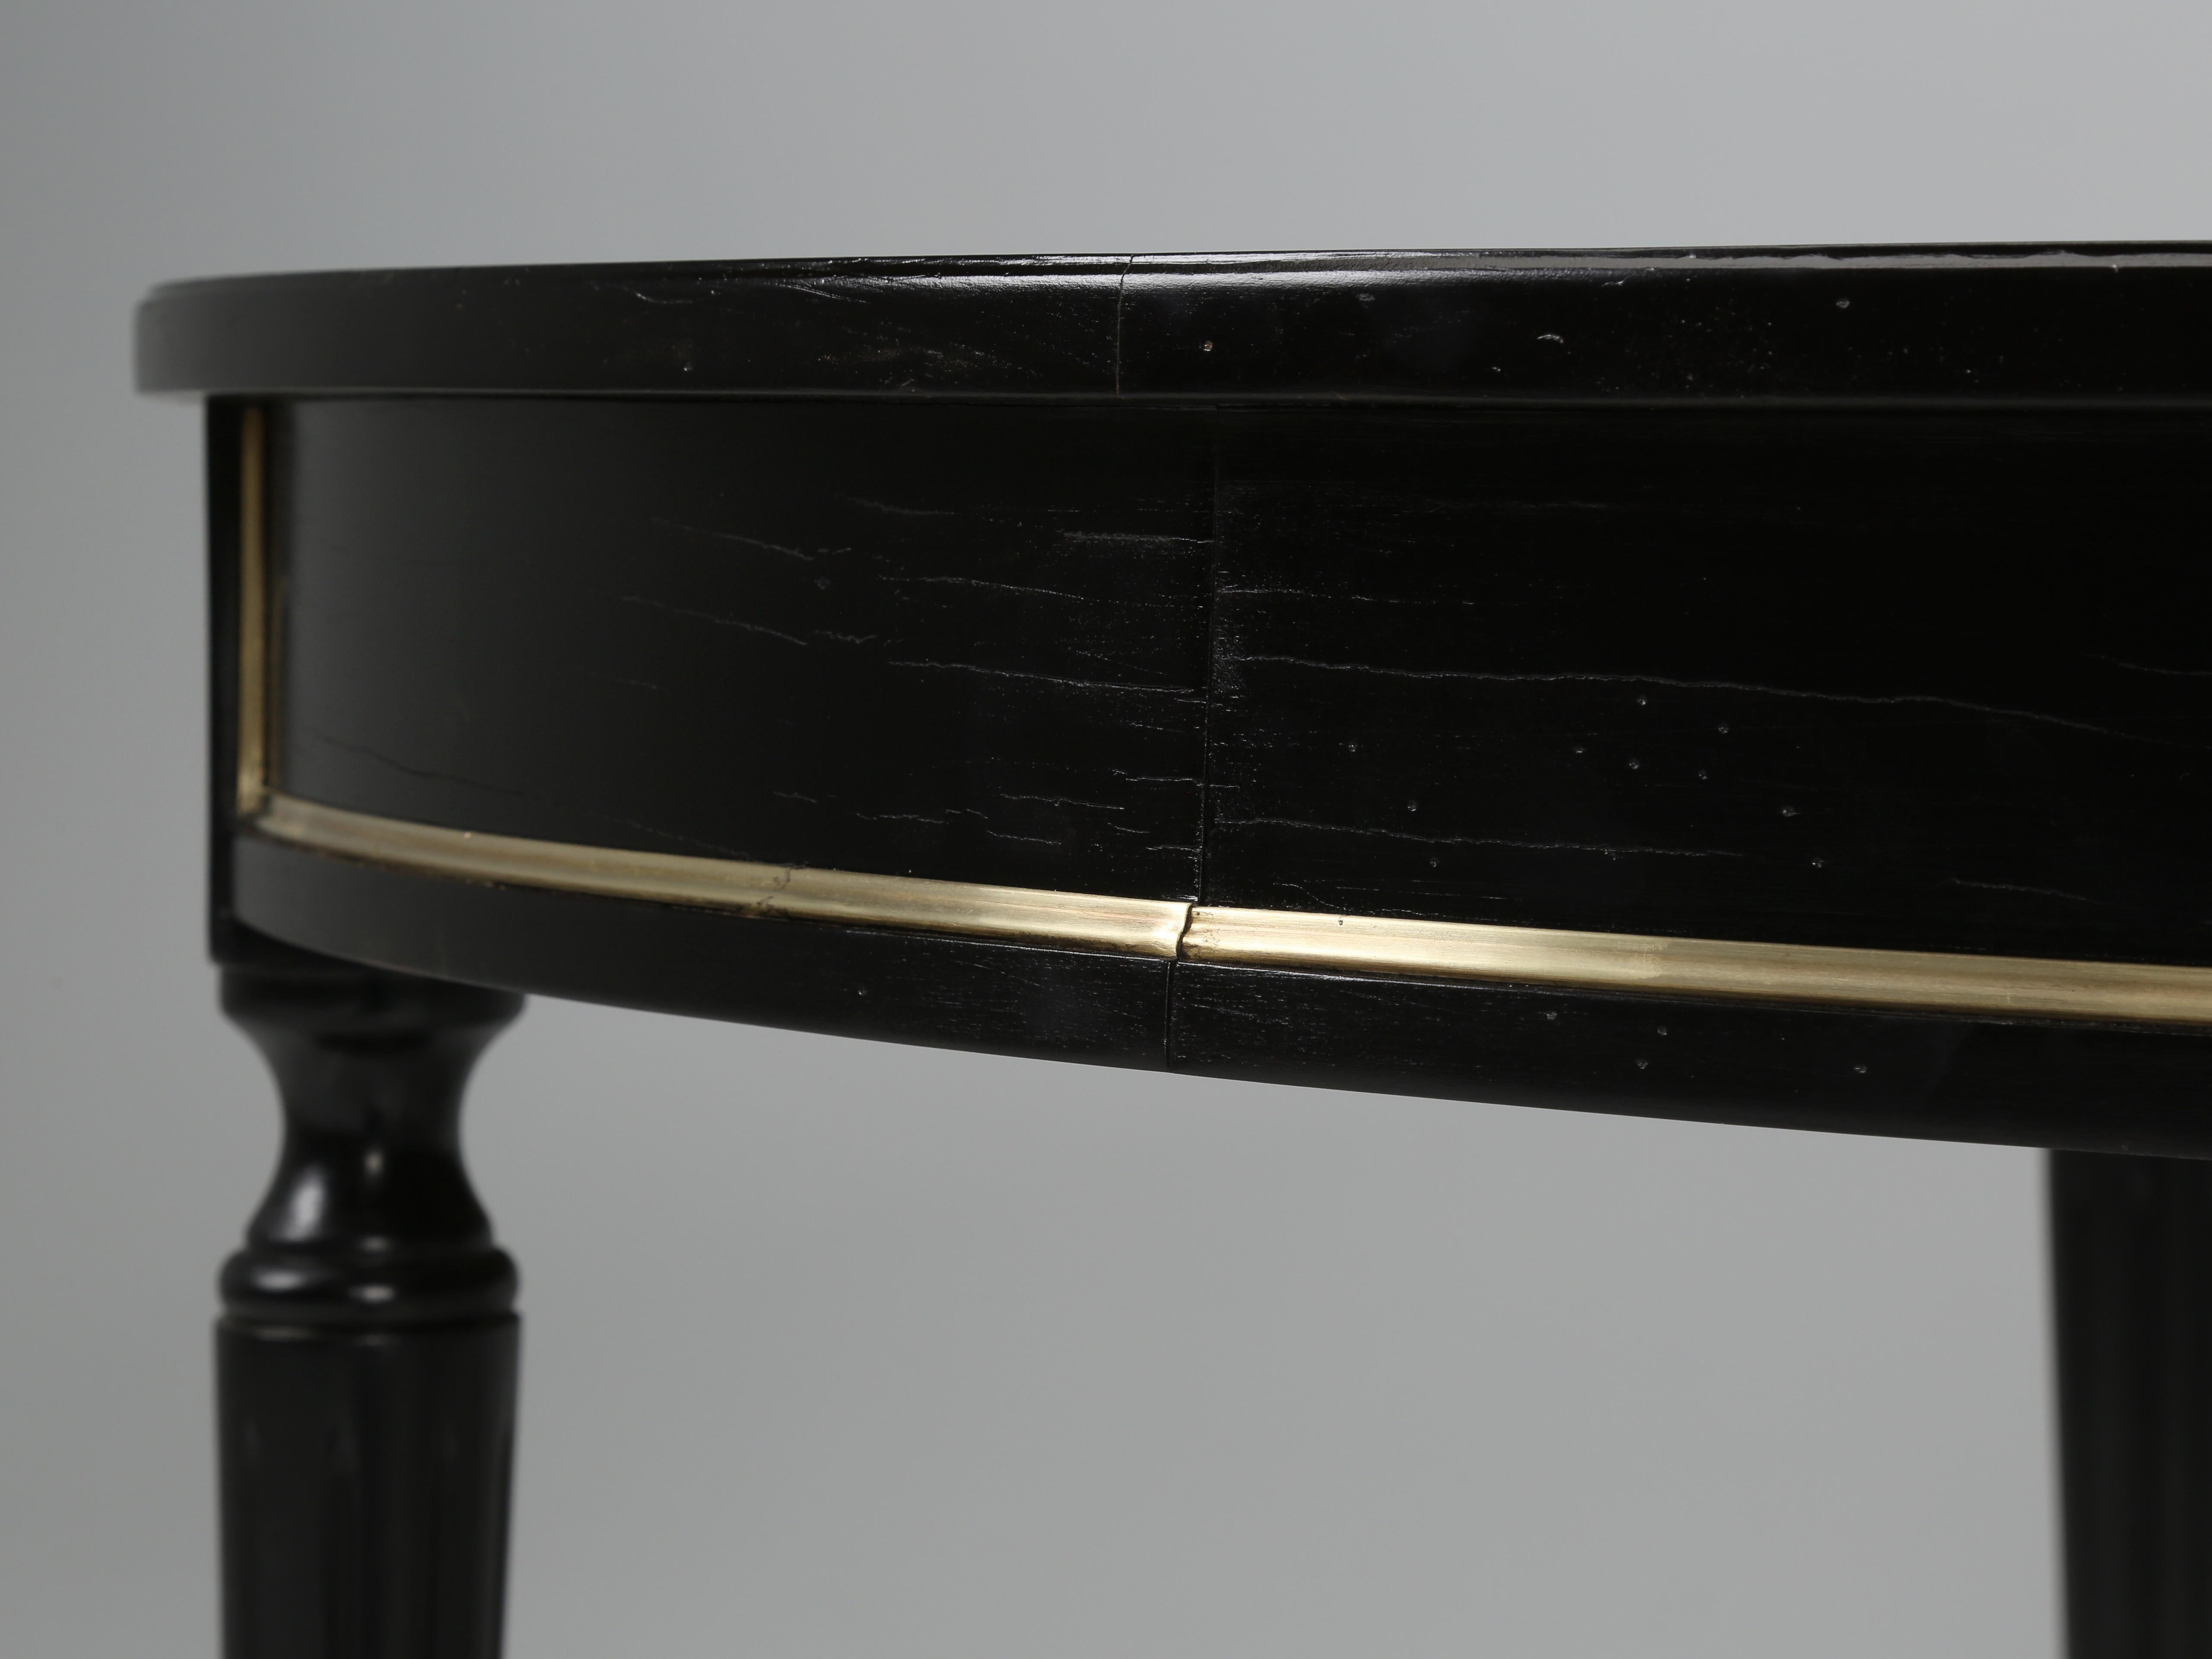 Vintage French Louis XVI Style Round Dining Table with Recent Ebonized Finish 3